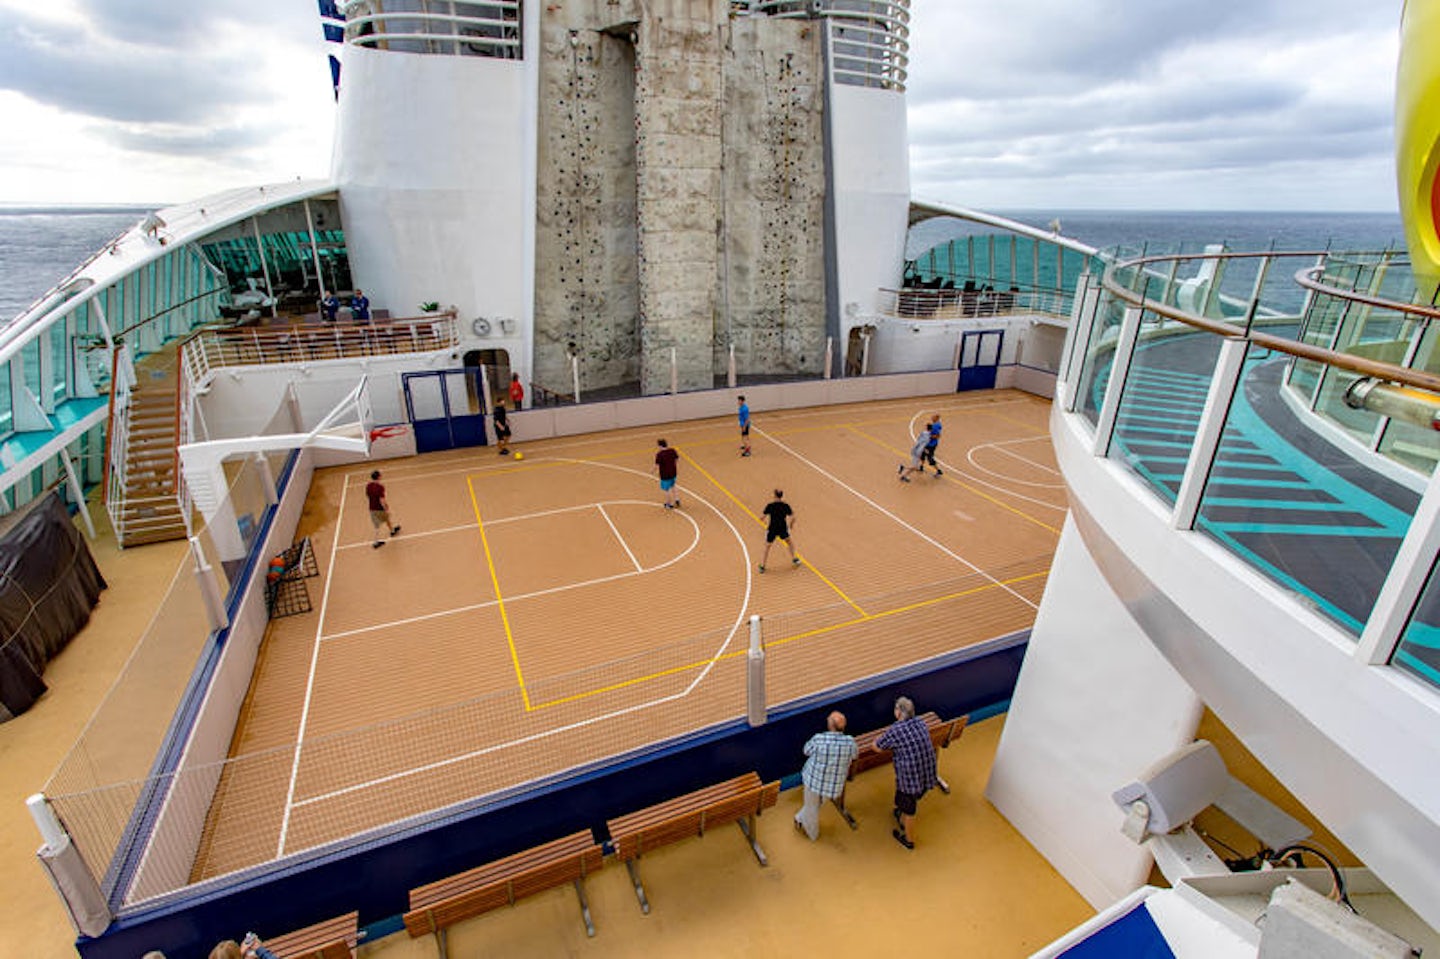 Sports Court on Independence of the Seas